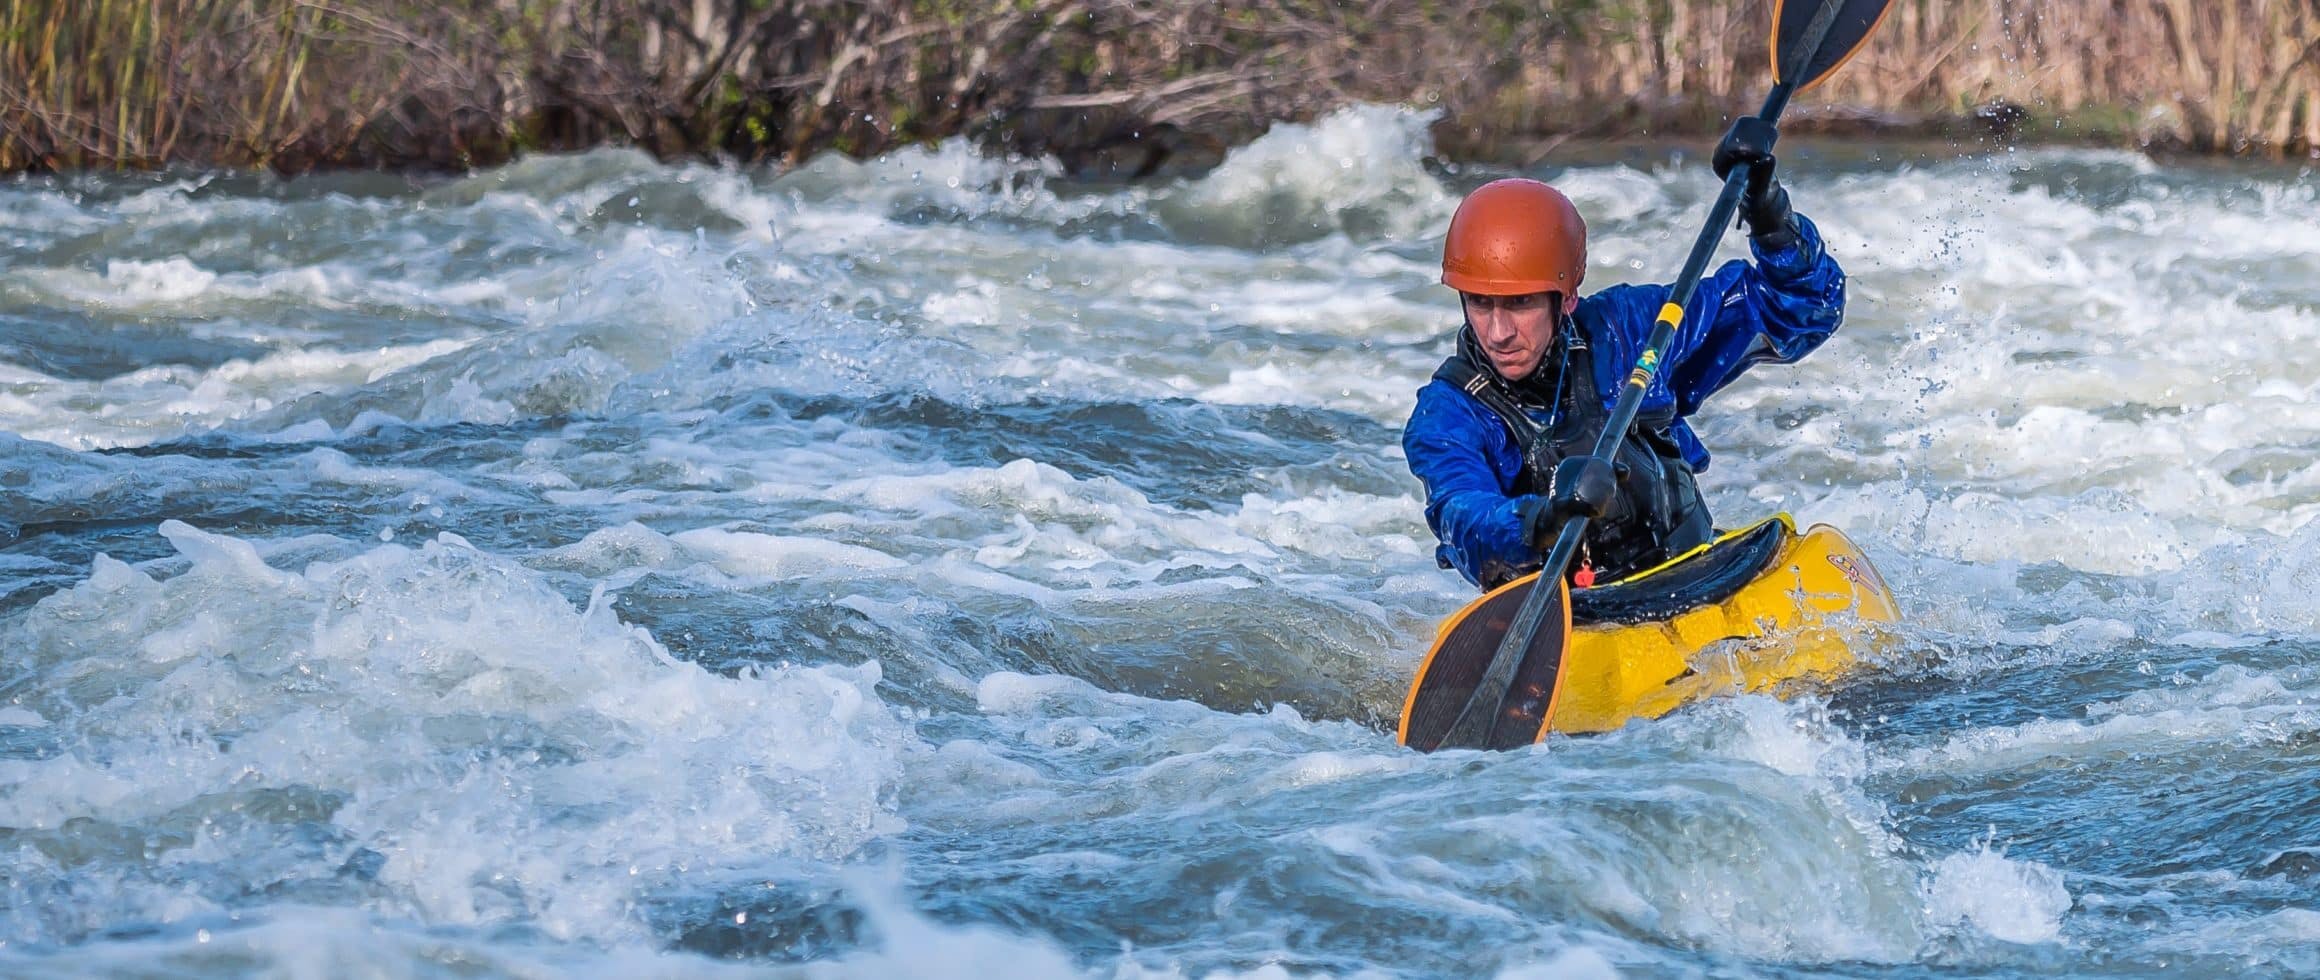 Rapids, water levels, and canoeist classification